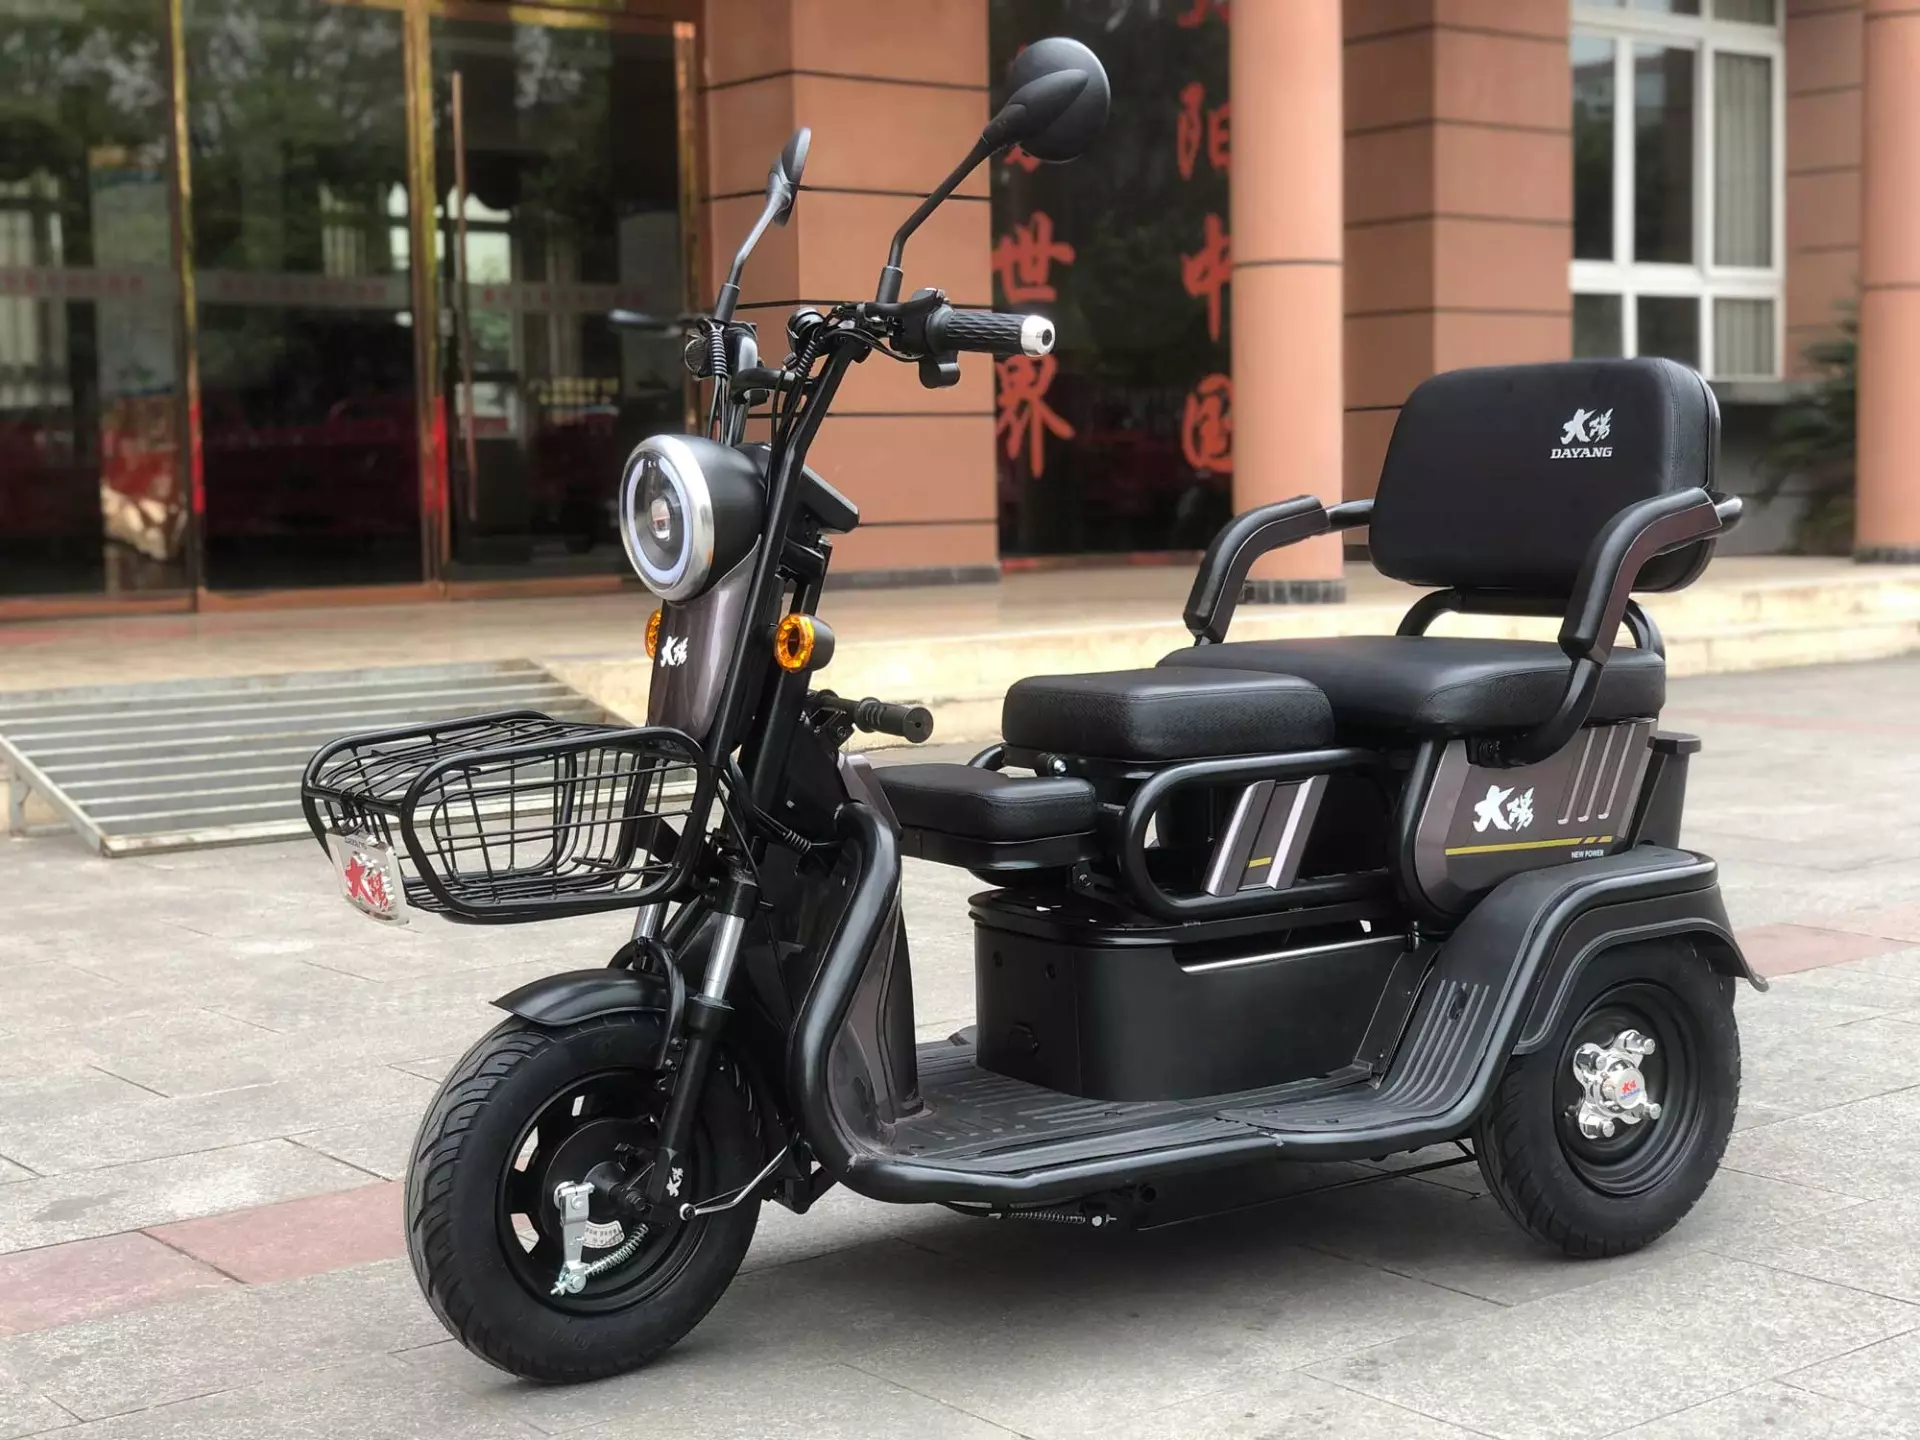 2021 best safety and powerful High quality New Model Favorable passenger electric tricycle various Cheap 500w China 3wheel